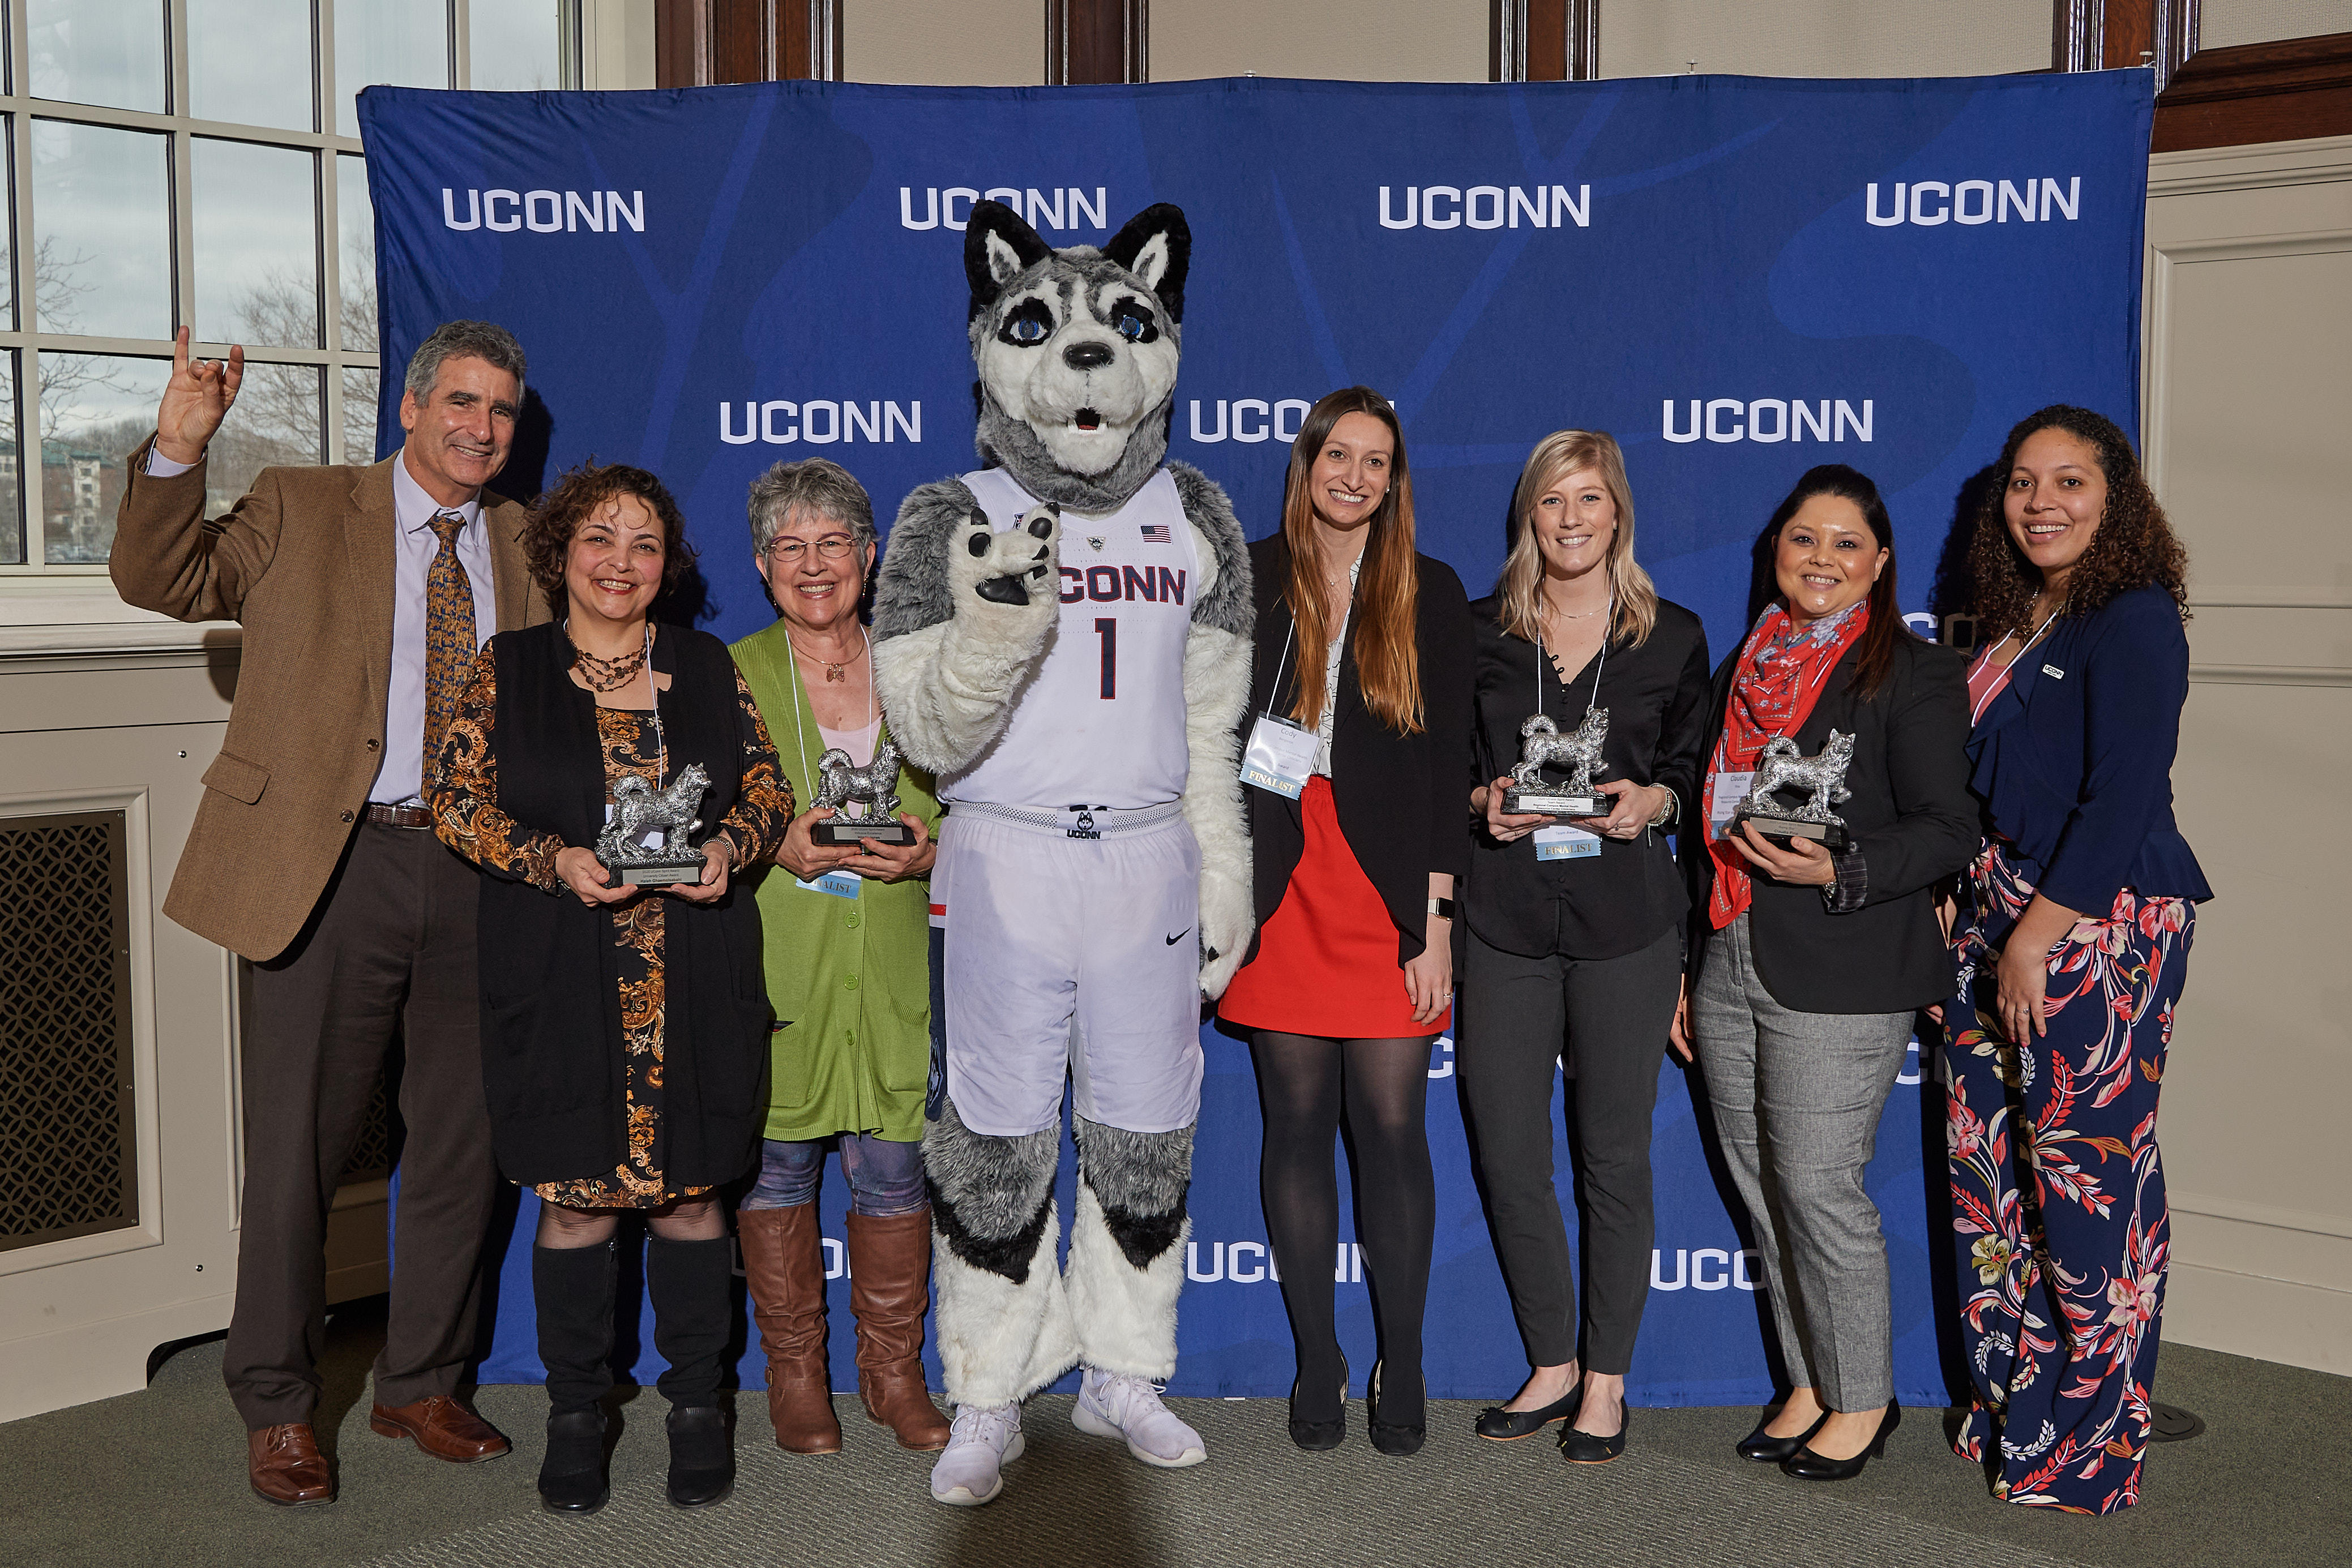 President Tom Katsouleas and Jonathan the Husky pose with 2020 UConn Spirit awards recipients at the Wilbur Cross North Reading Room